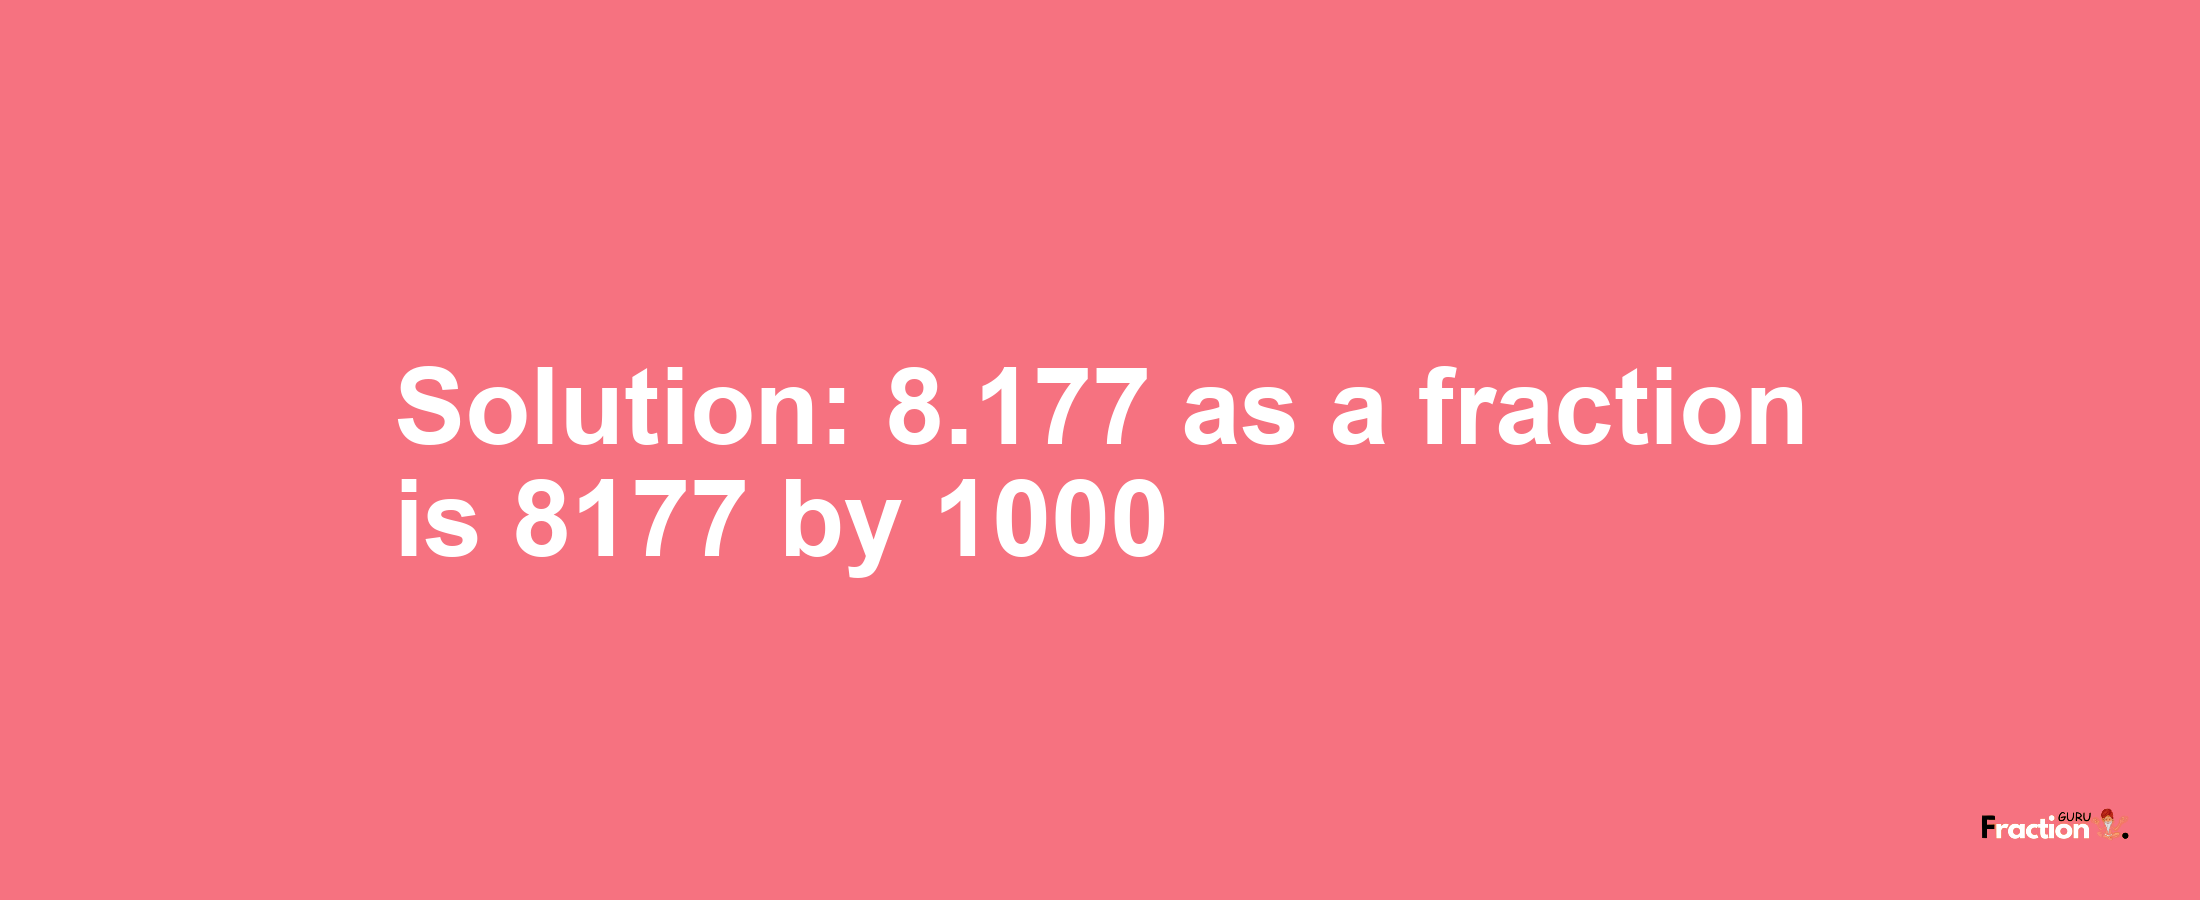 Solution:8.177 as a fraction is 8177/1000